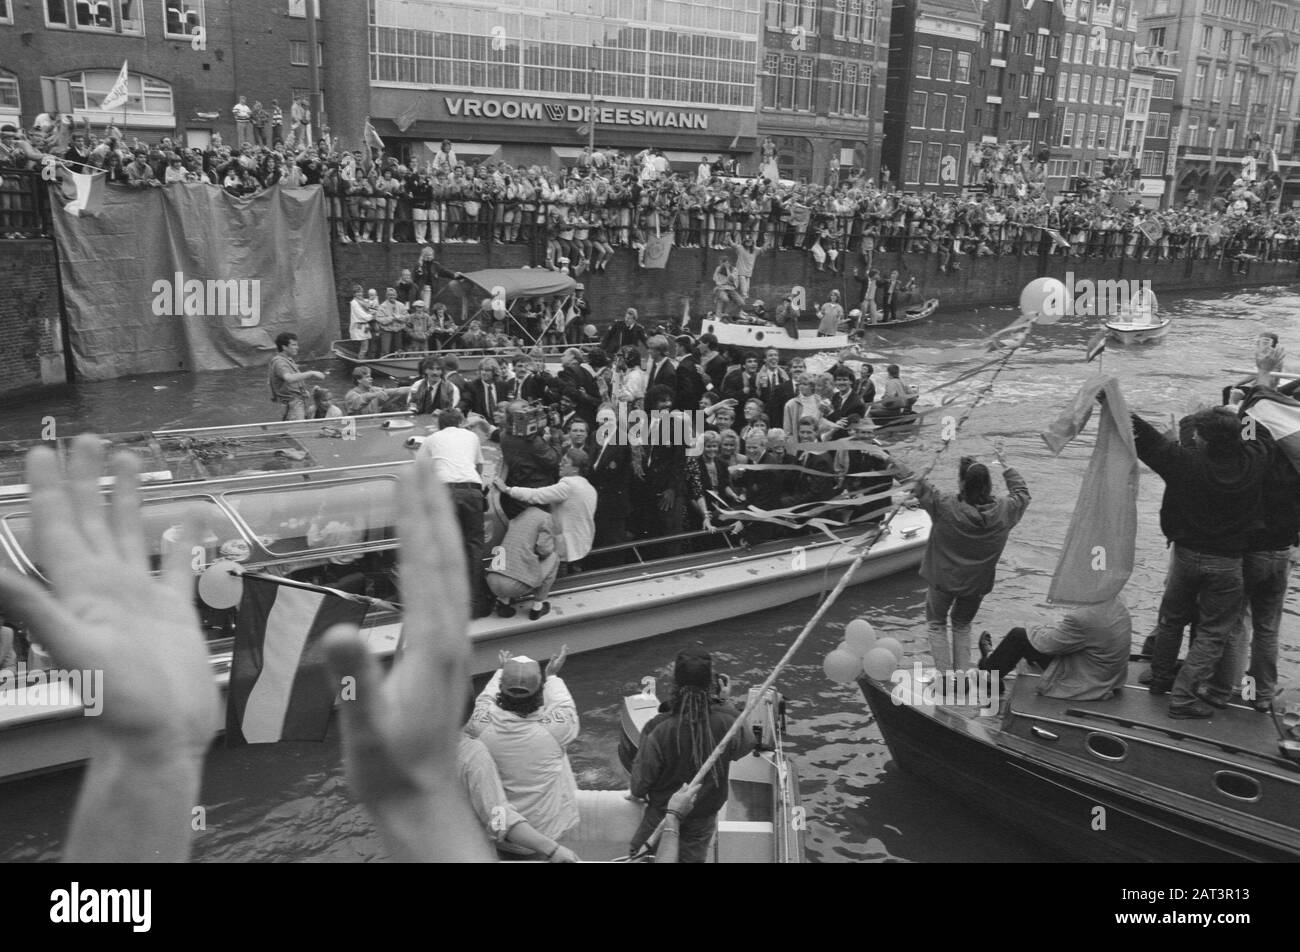 Dutch team after European Championship 1988 in Munich in tour through the canals Date: June 26, 1988 Location: Amsterdam, Munich Keywords: CANTS, sports, football Stock Photo -